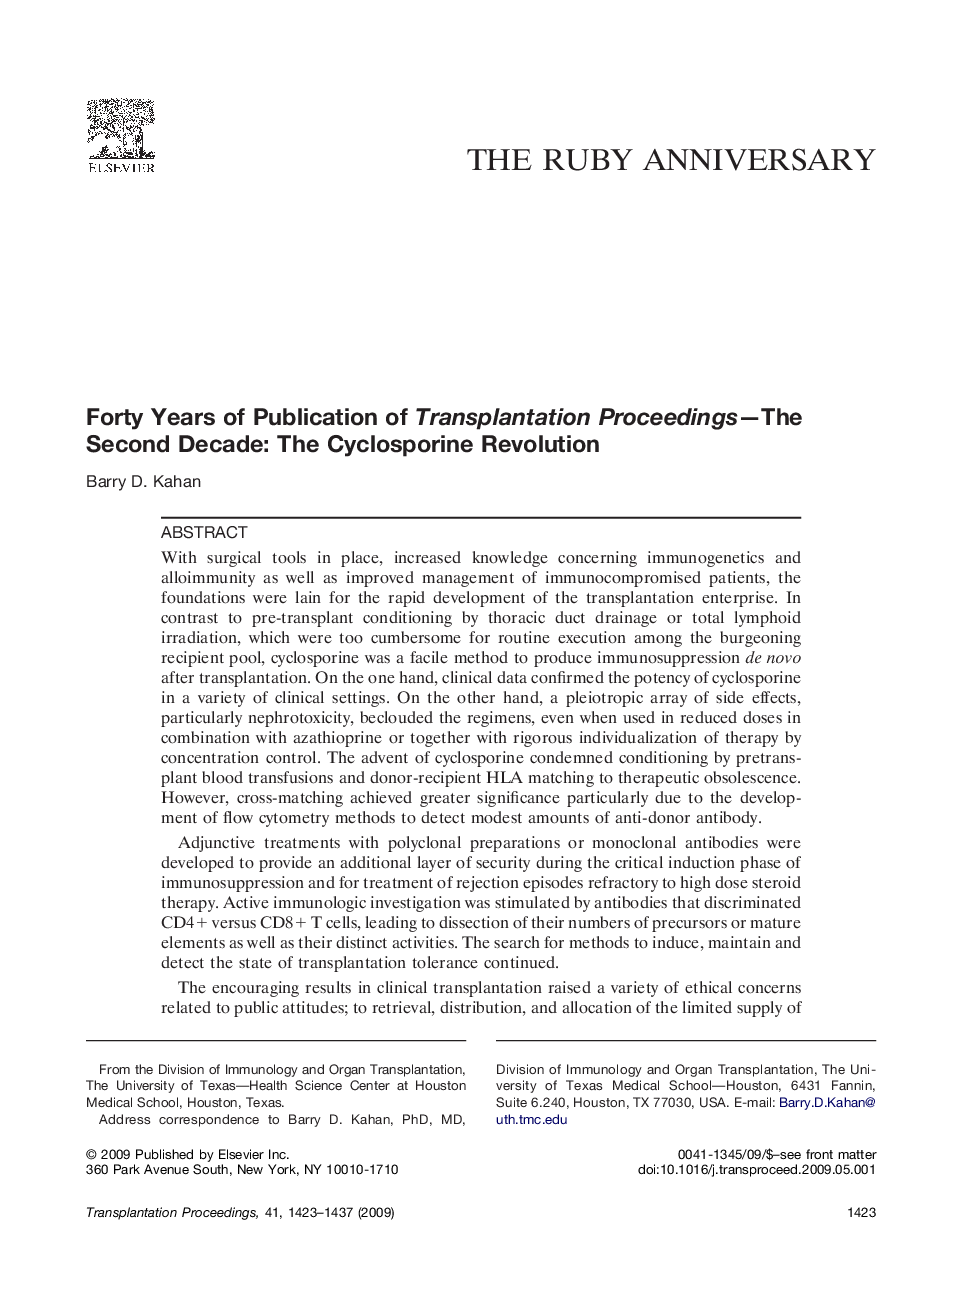 Forty Years of Publication of Transplantation Proceedings—The Second Decade: The Cyclosporine Revolution